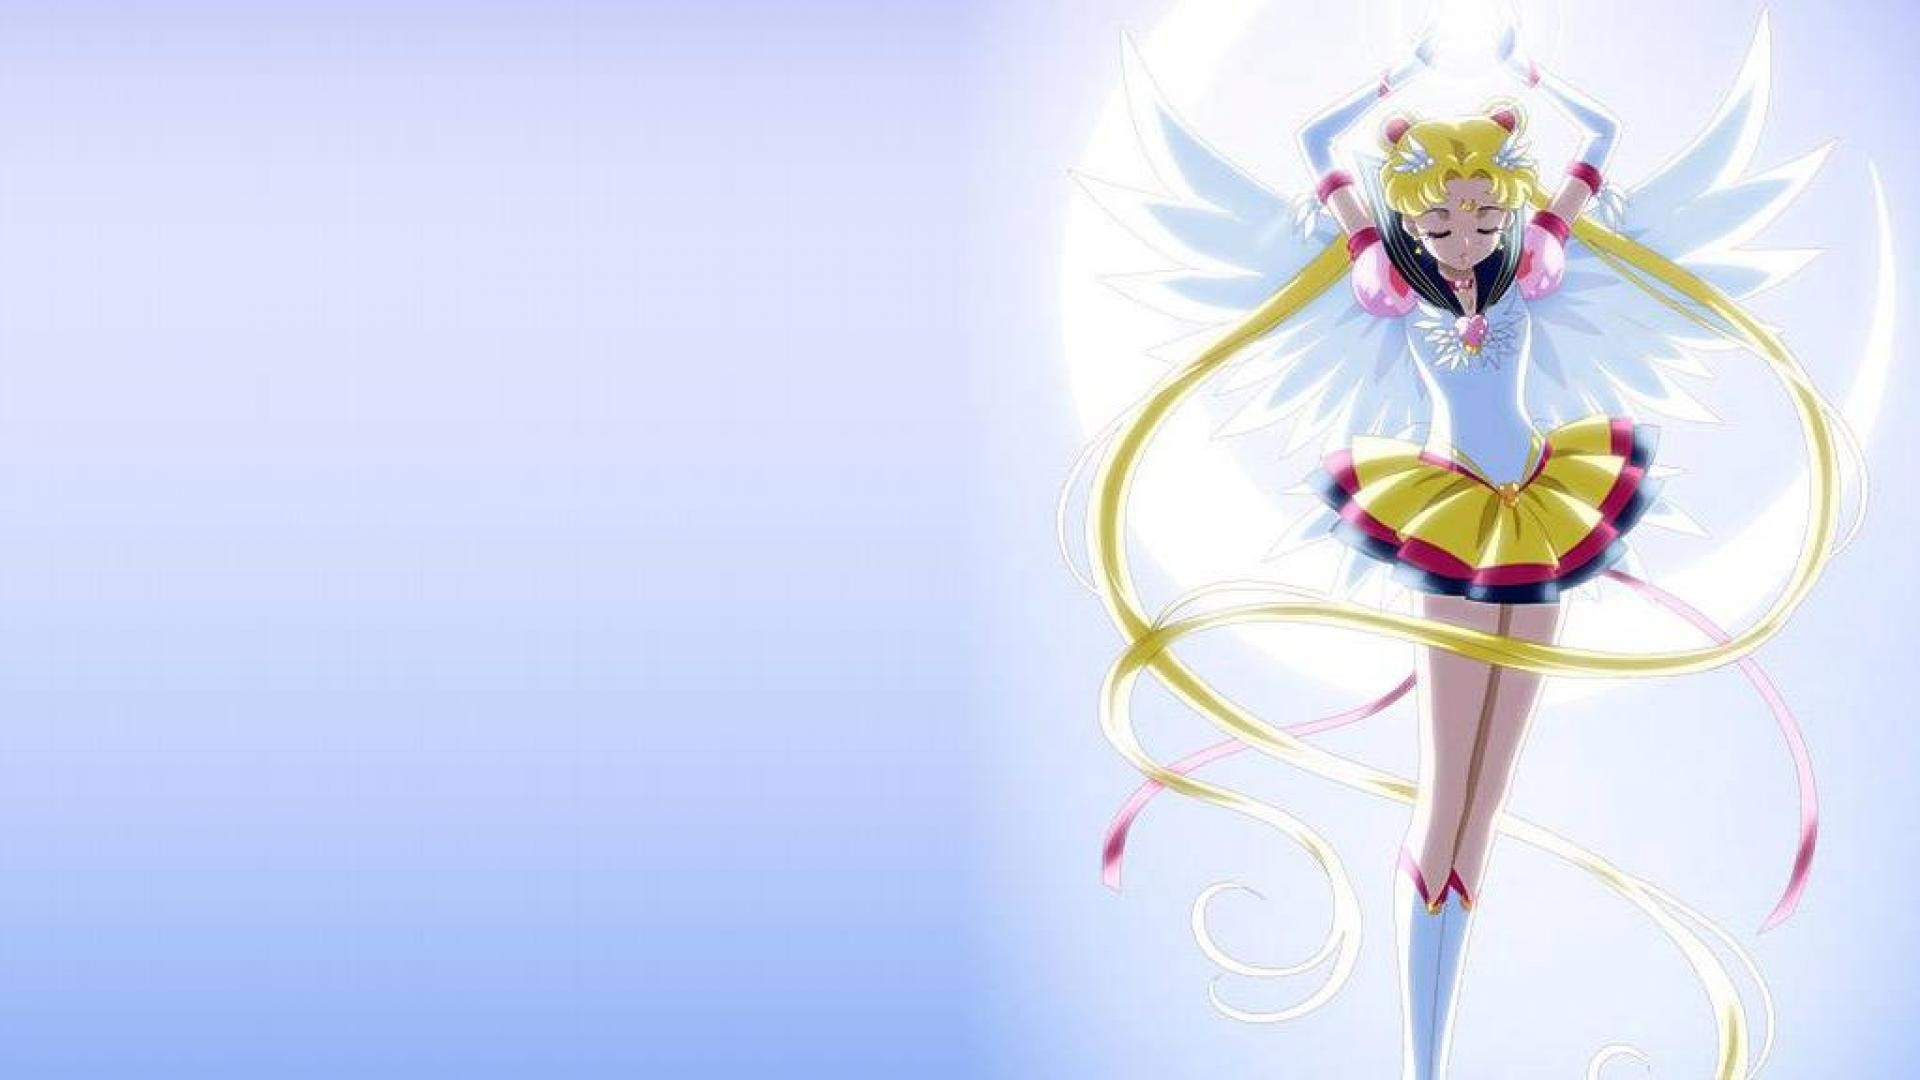 1920x1080 Sailor moon - (#161965) - High Quality and Resolution Wallpapers on .